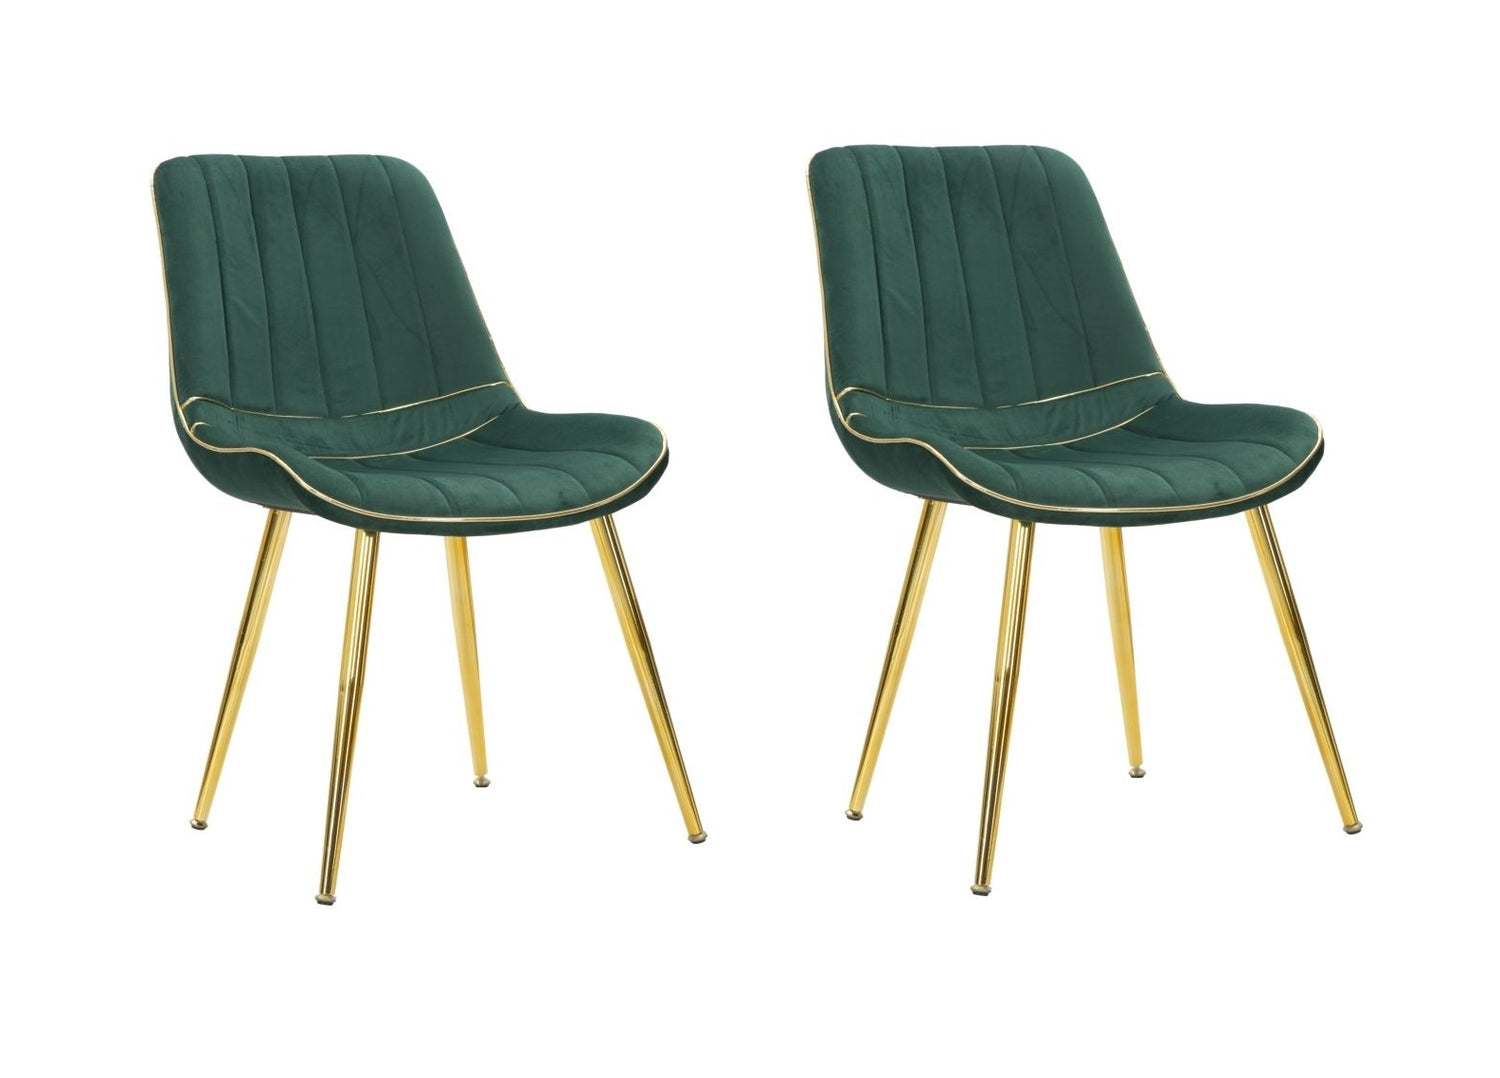 Buy Set of 2 chairs upholstered with fabric and metal legs Paris Velvet Green / Gold, l51xW59xH79 cm online, best price, free delivery